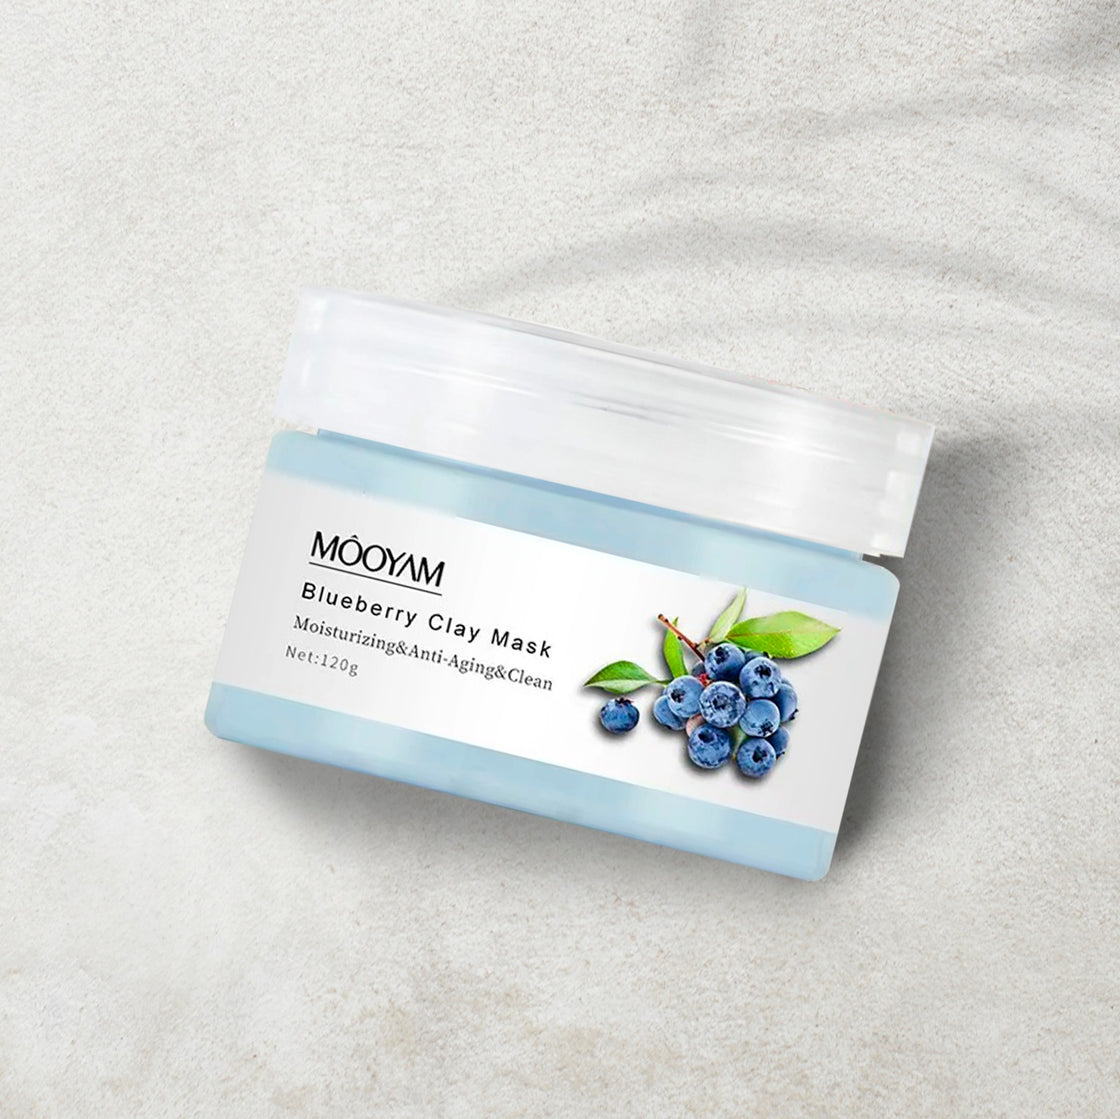 Blueberry Dead Sea Mud Mask For Deep Cleansing - 120Gm